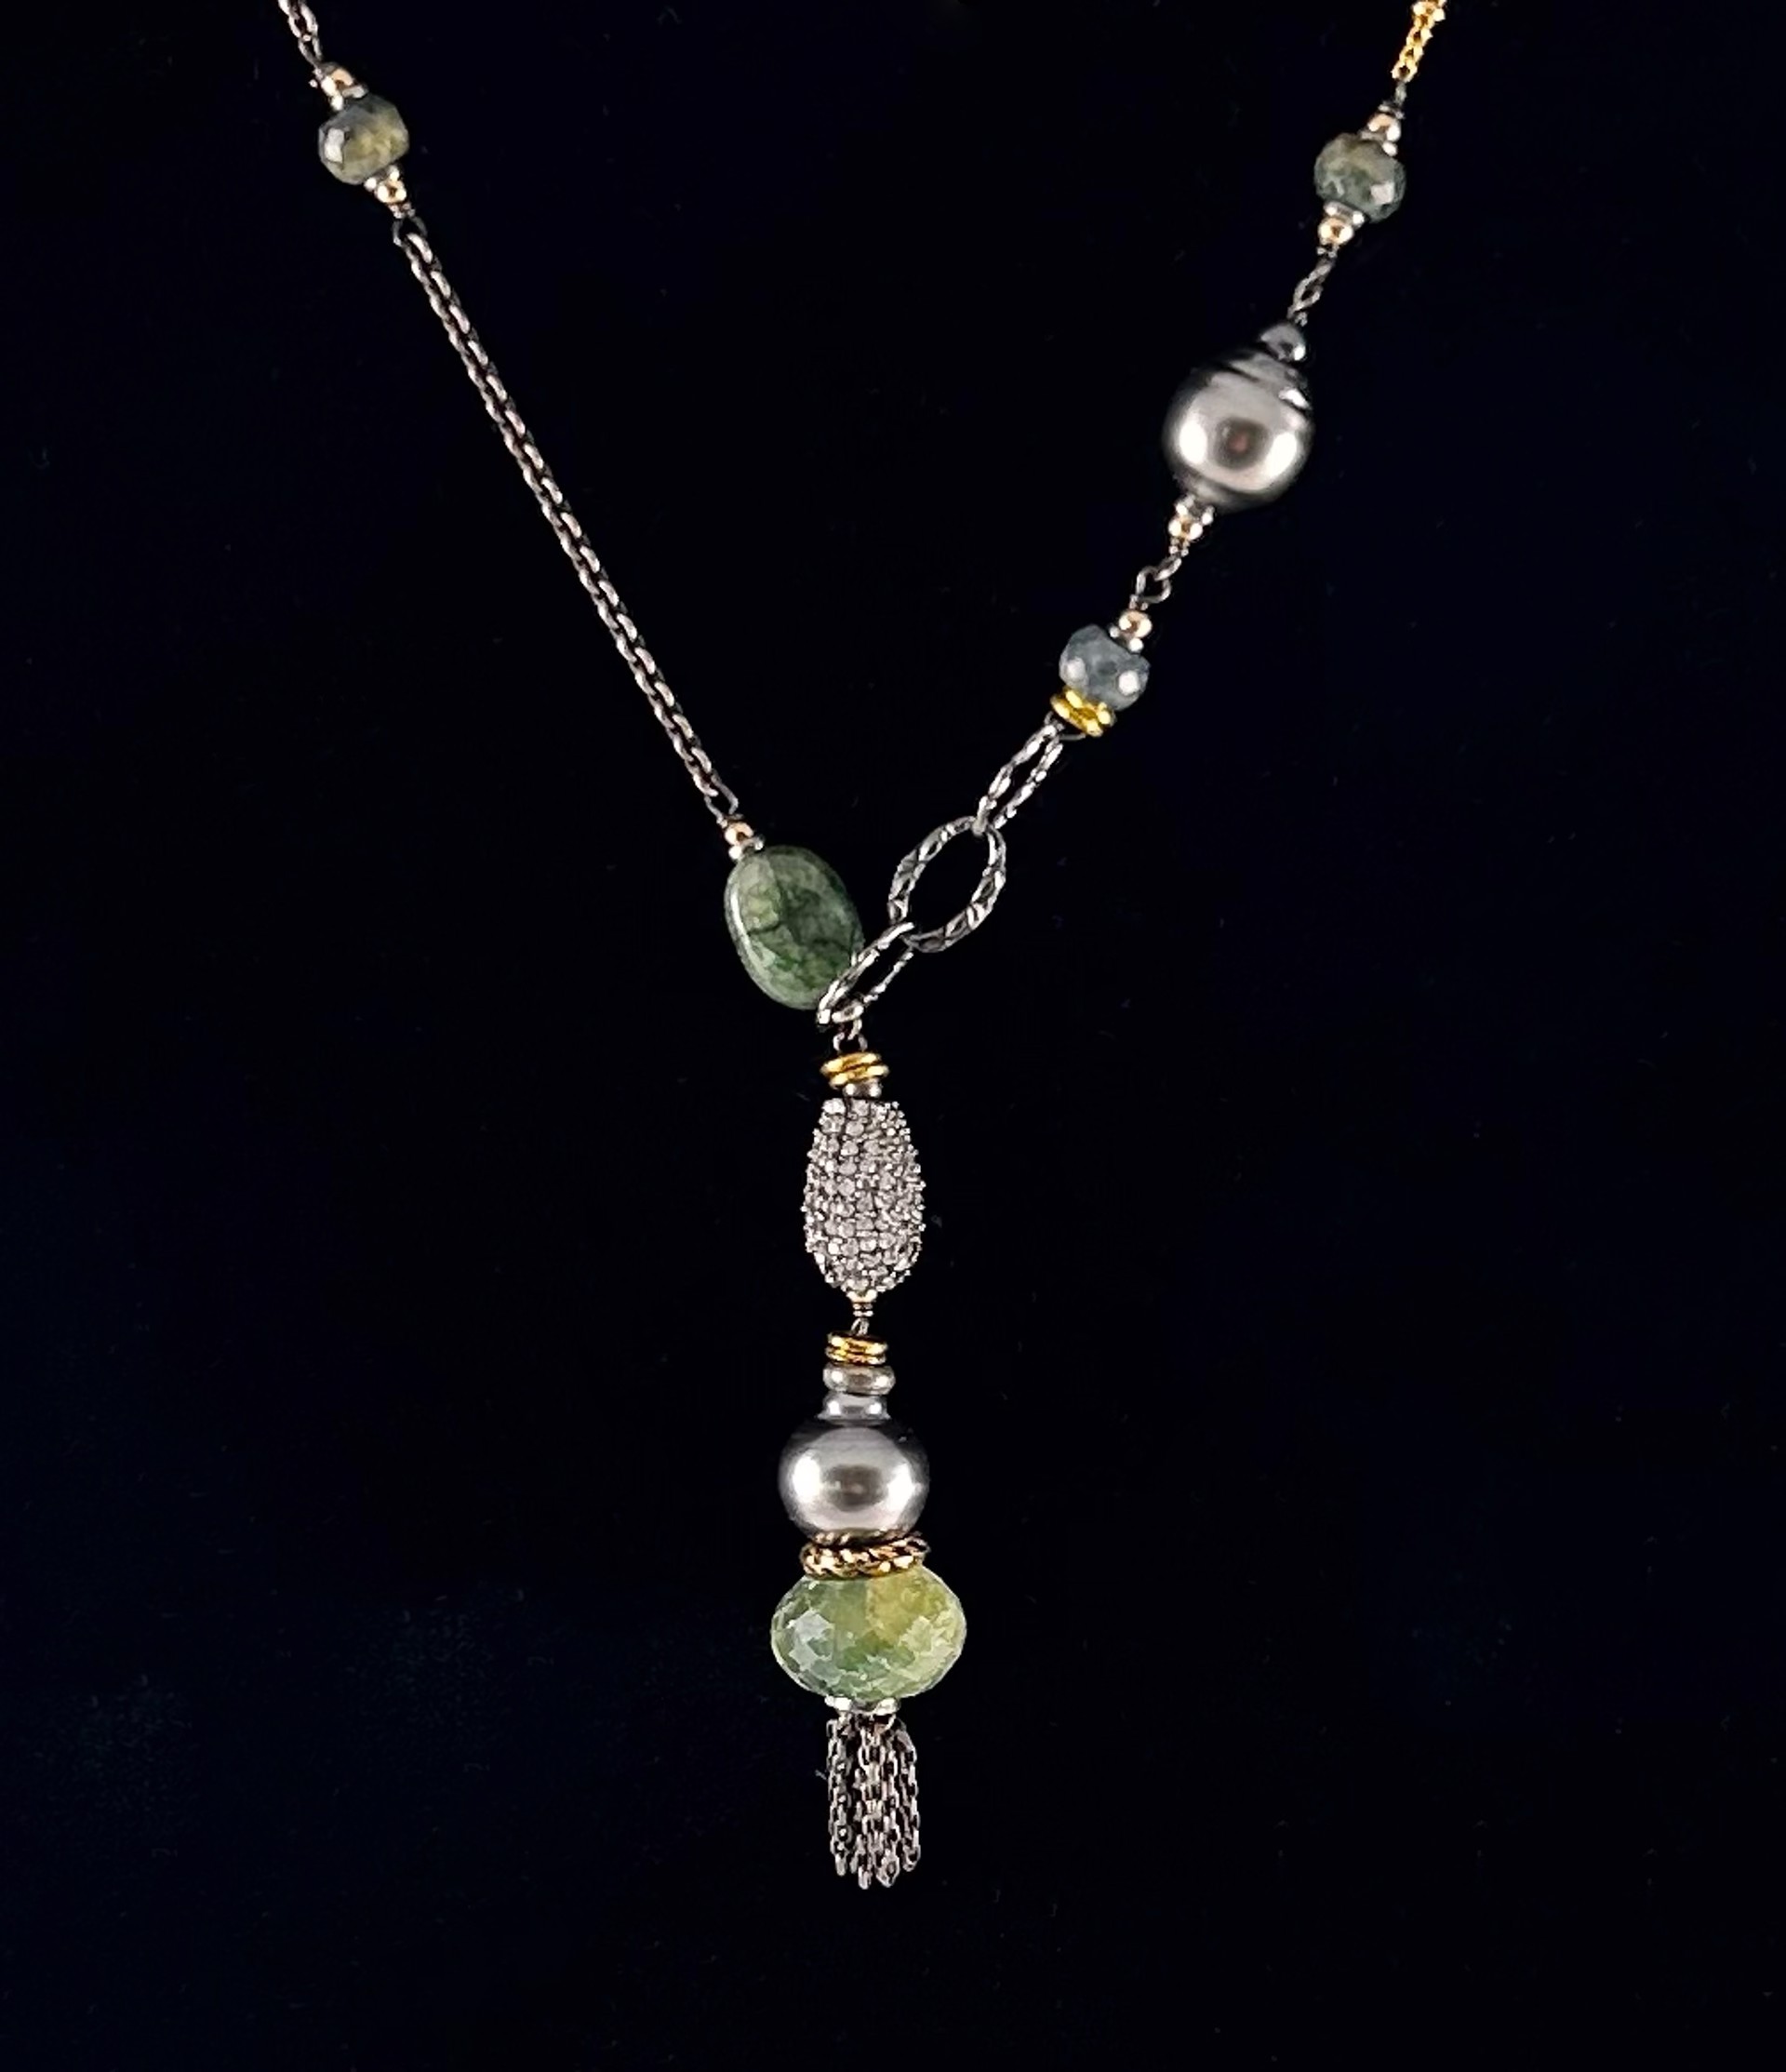 Jade, black pearl, emerald, CZ pave, sterling silver, and gold vermiel Necklace by Jeri Mitrani